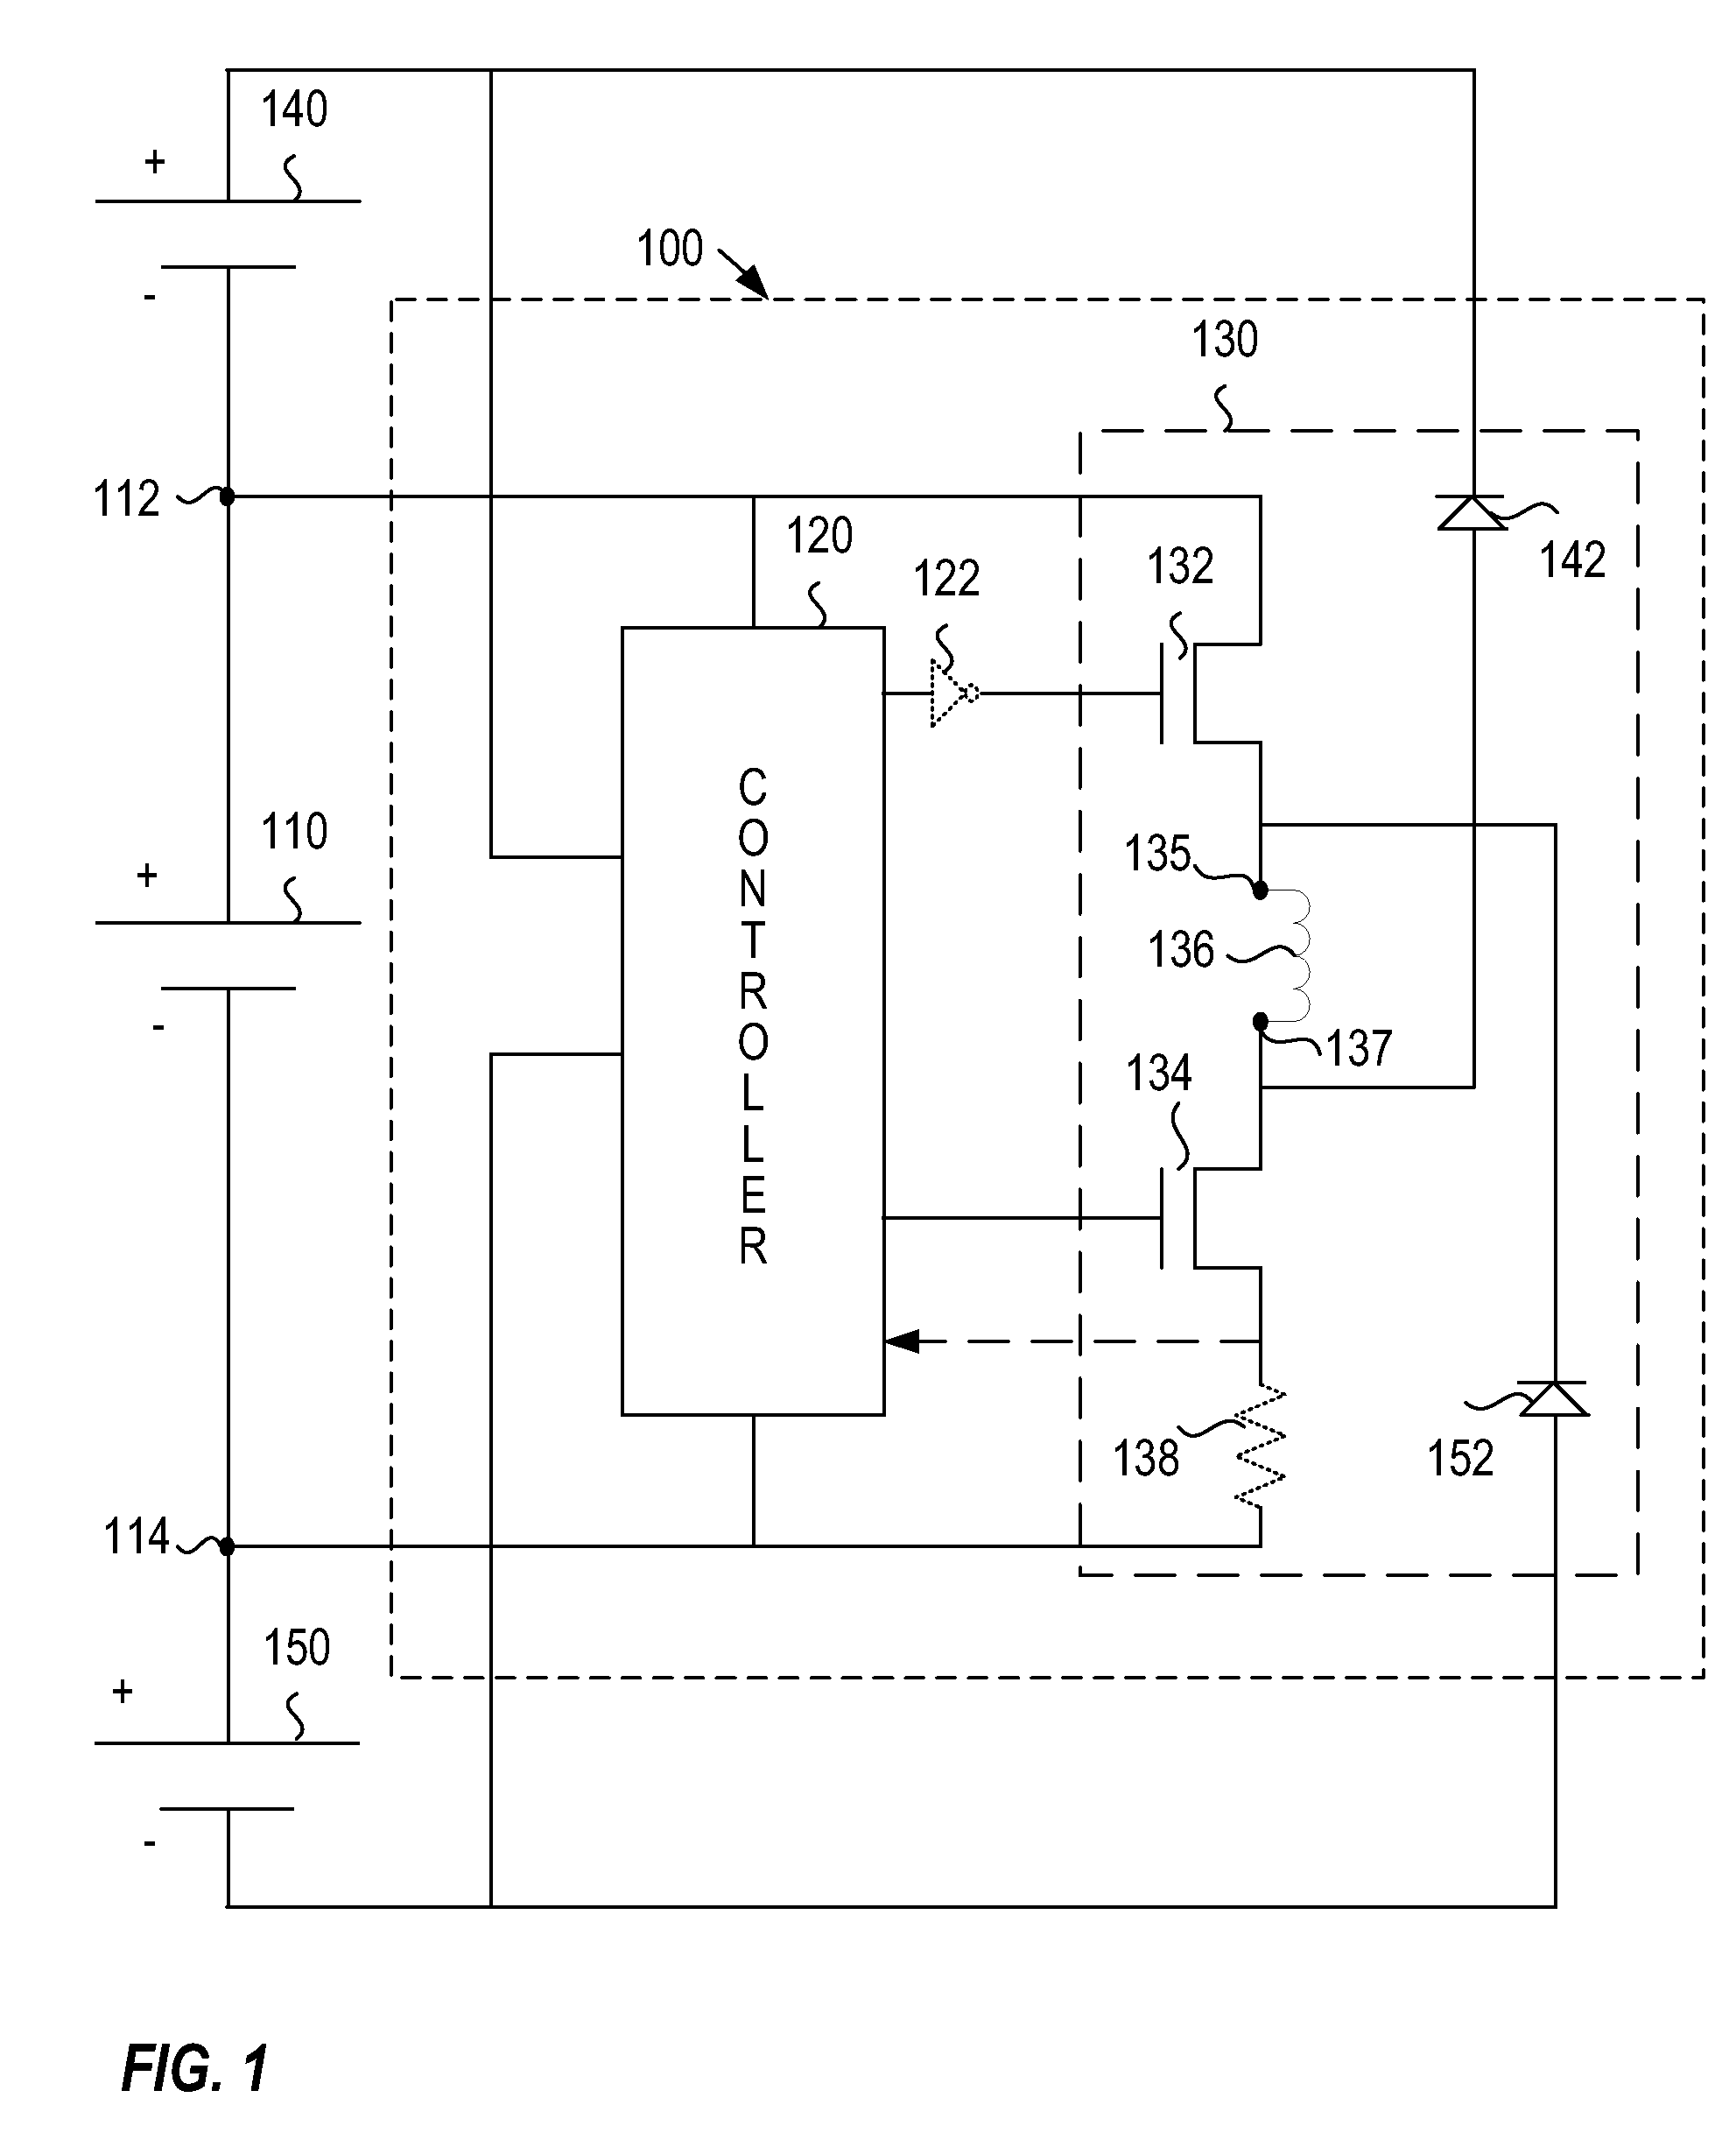 Autonomous balancing of series connected charge storage devices